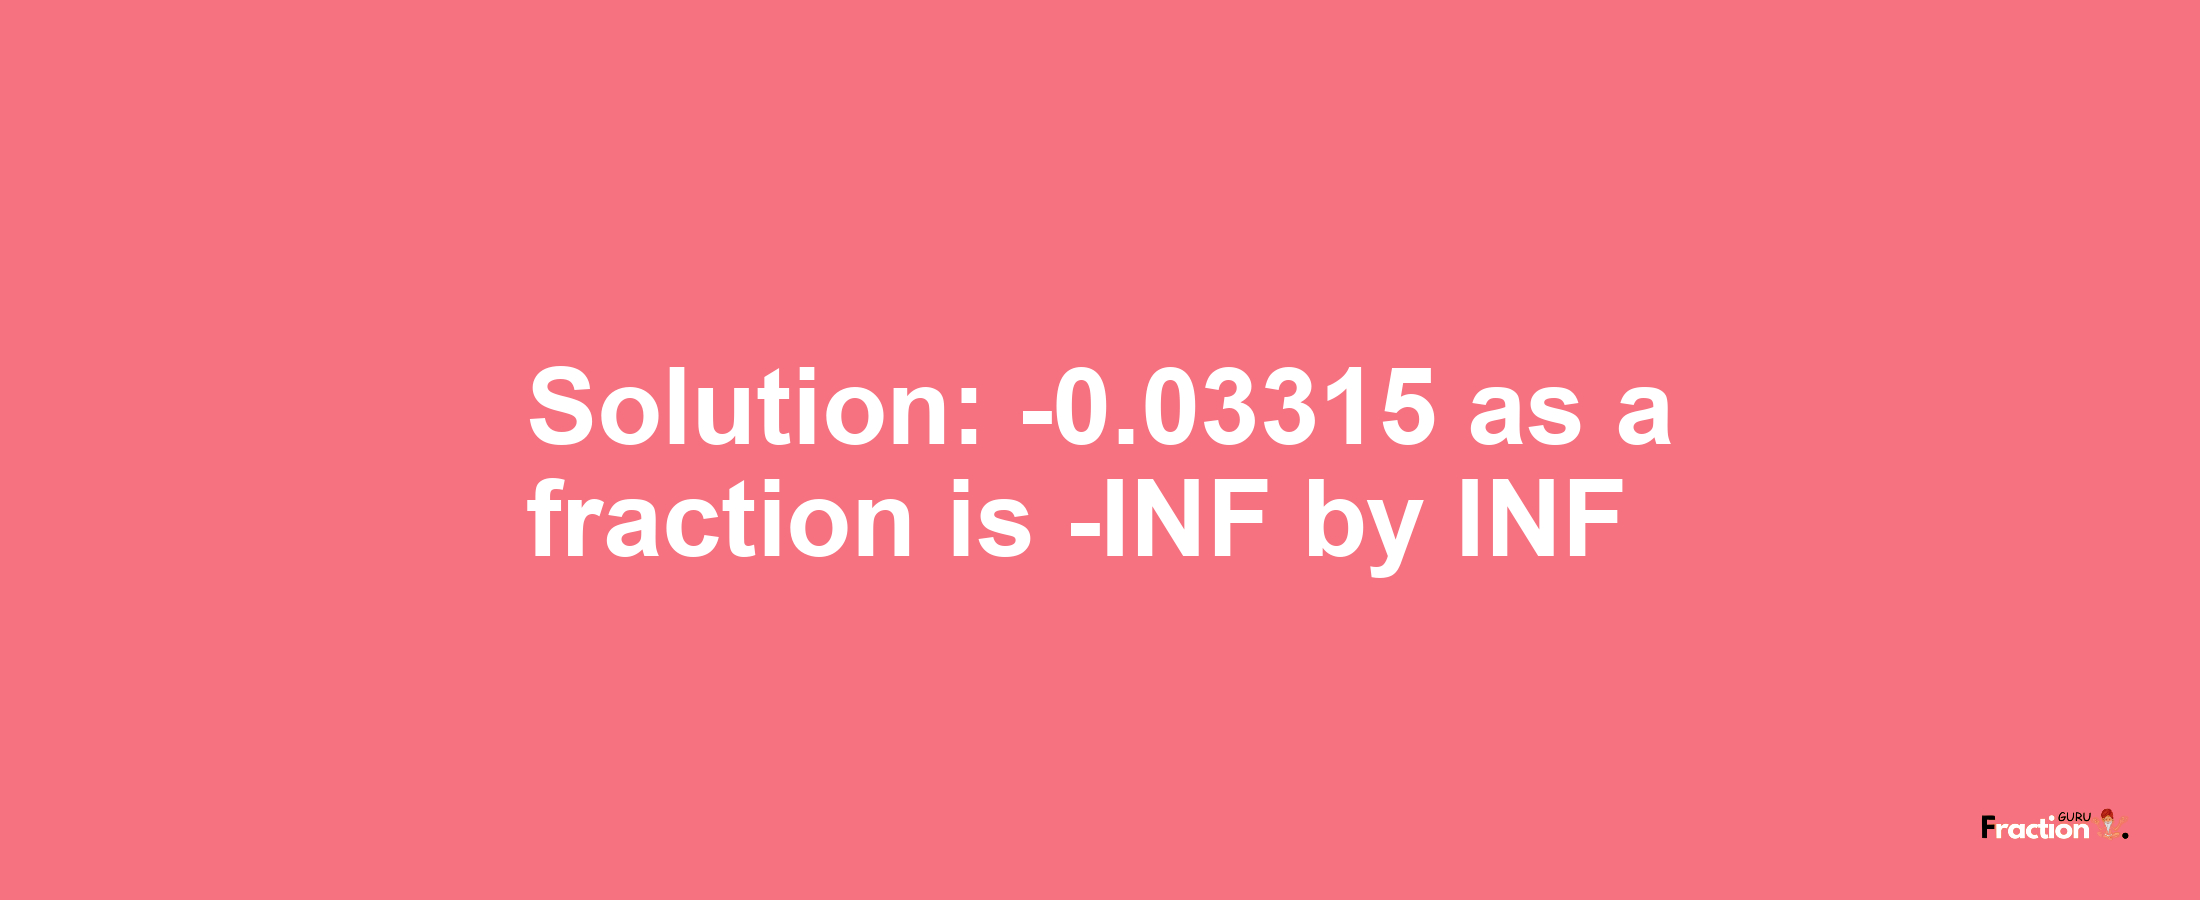 Solution:-0.03315 as a fraction is -INF/INF